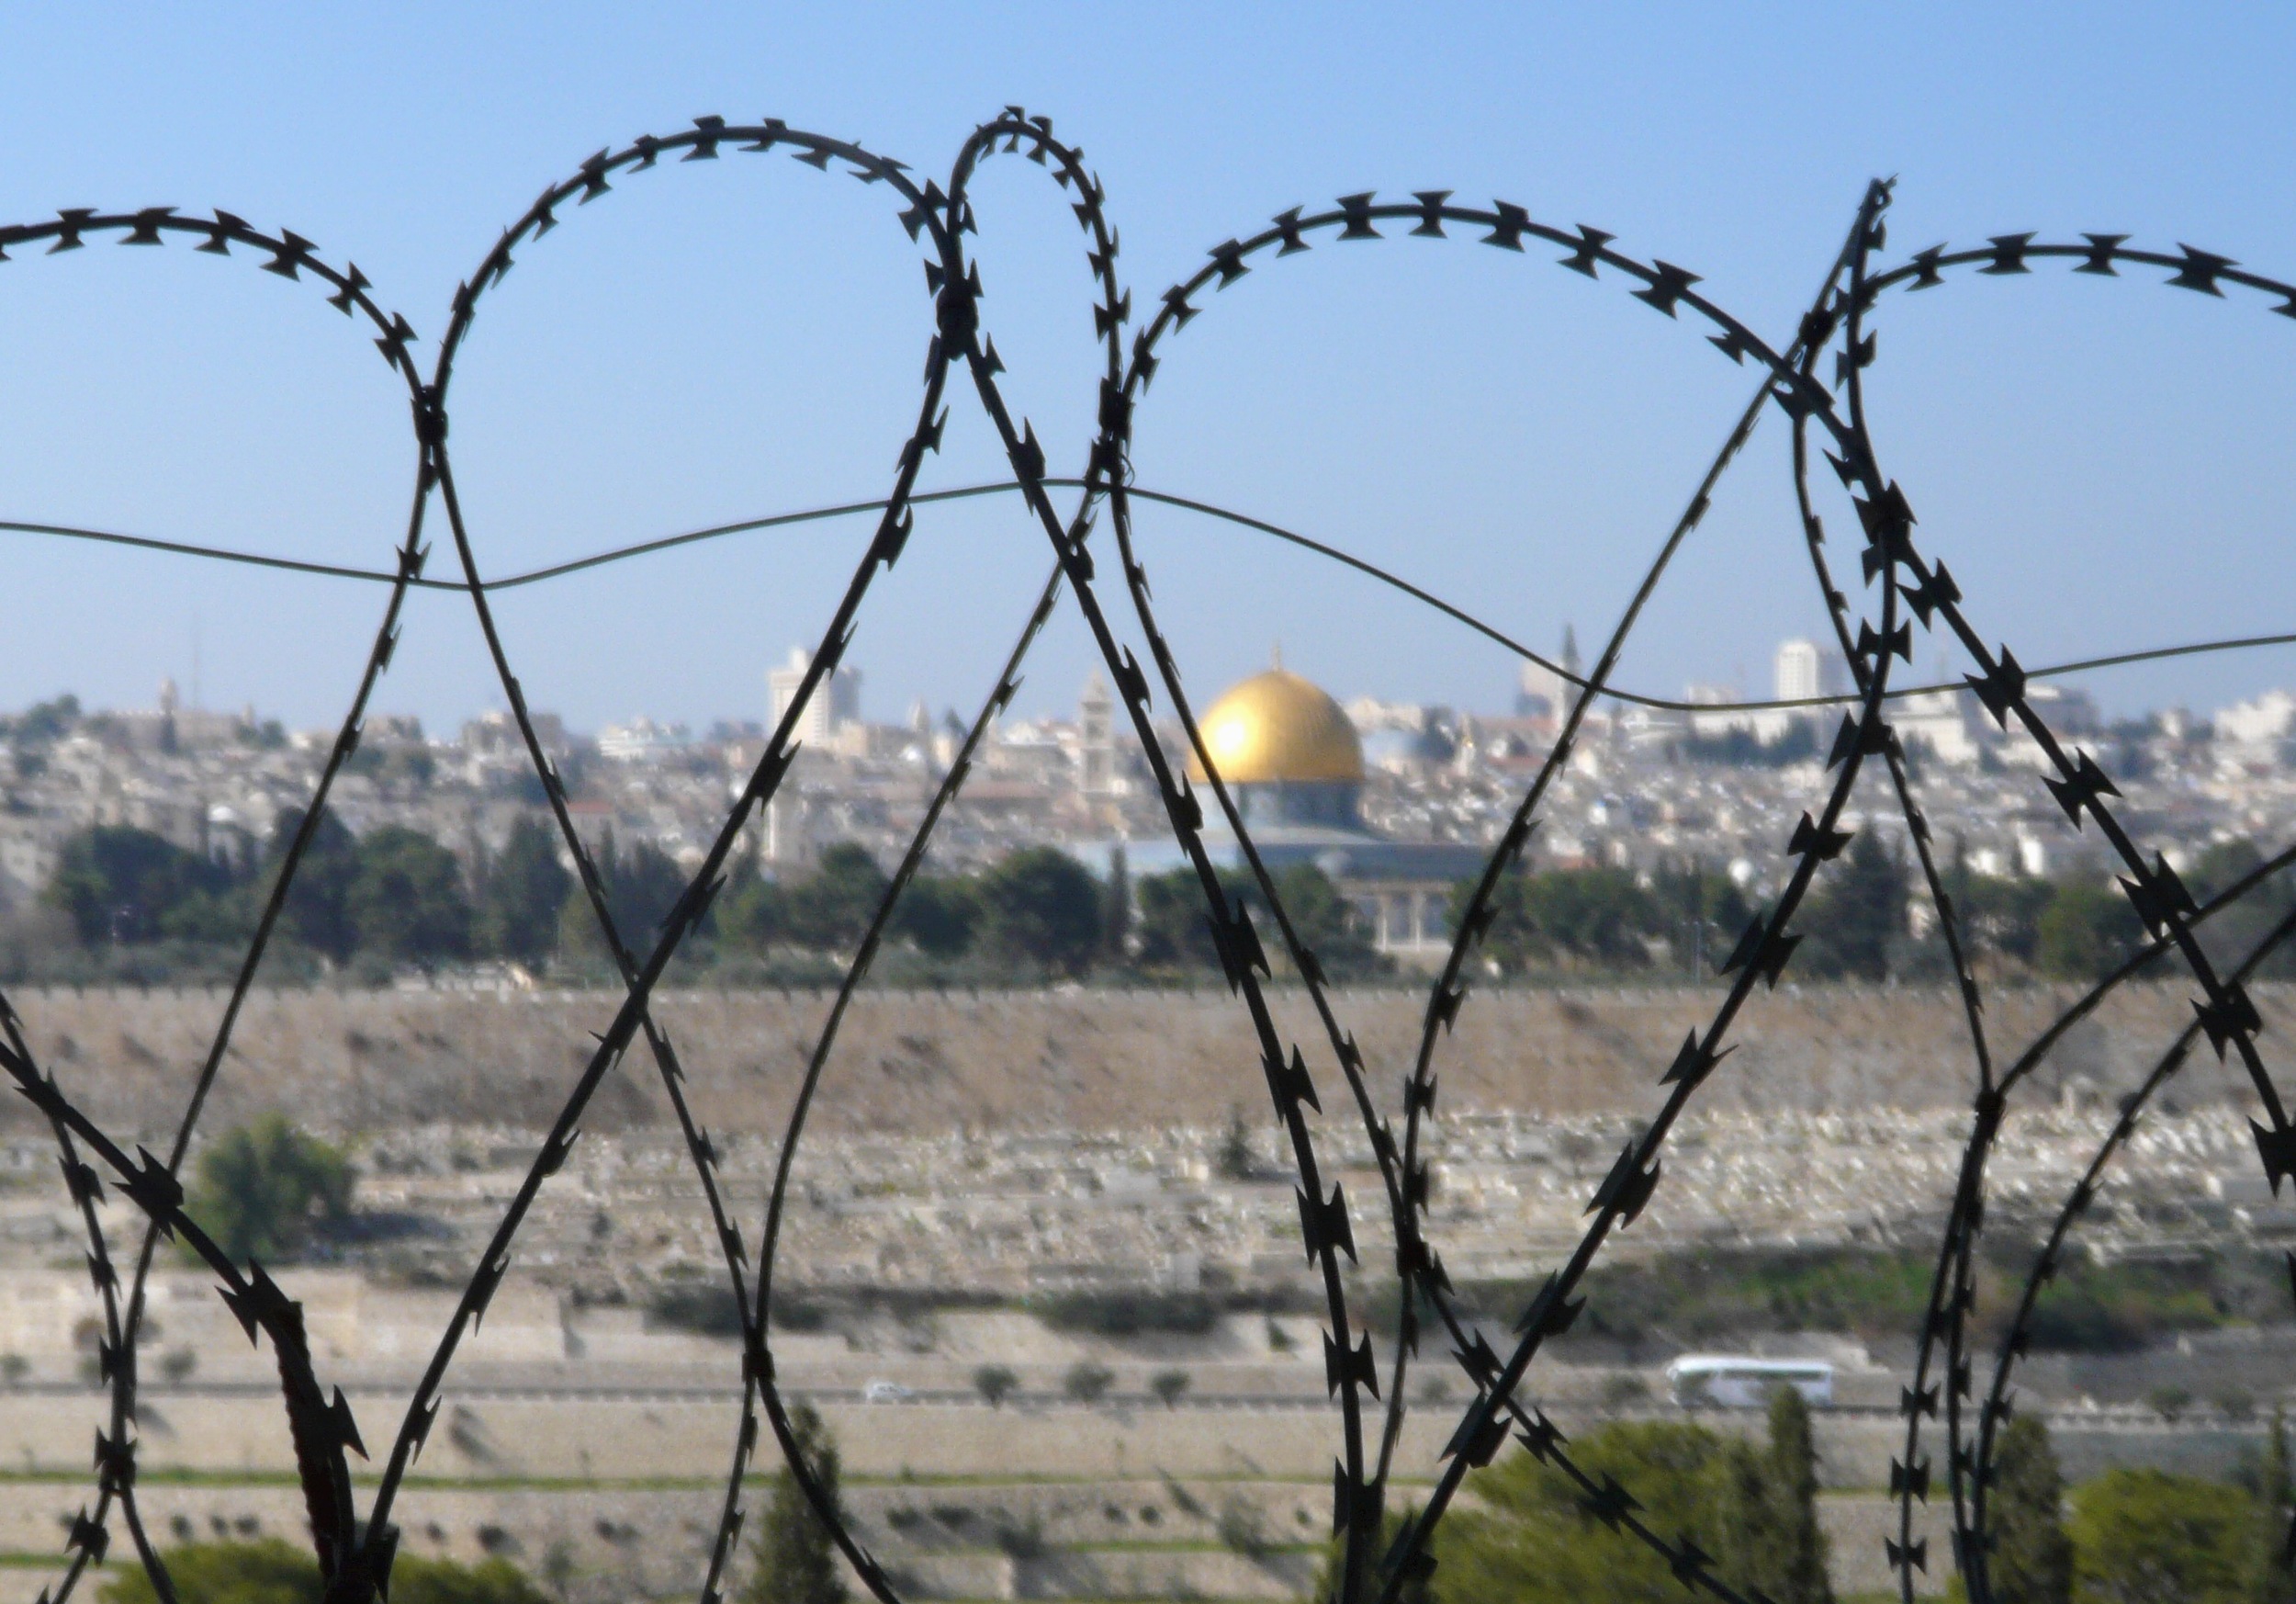 View of Jerusalem Old City through Barbed Wire